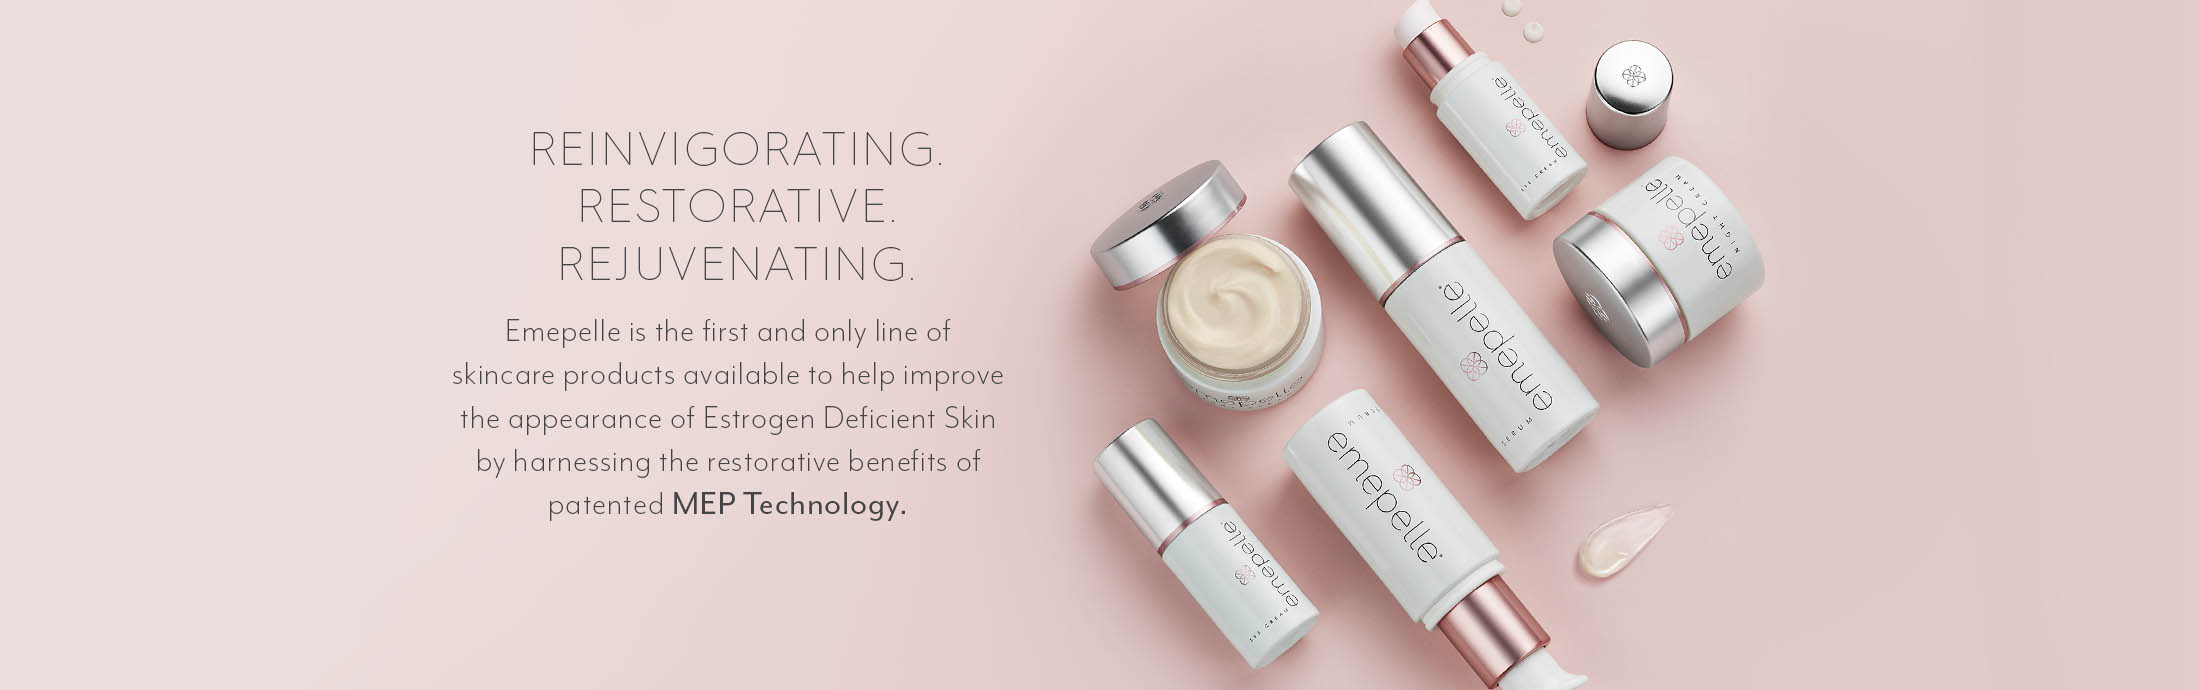 Reinvigorating Restorative Rejuvenating. Emepelle is the first and only line of skincare products available to help improve the appearance of the Estrogen deficient Skin by harnessing the restorative benefits of patented MEP Technology.